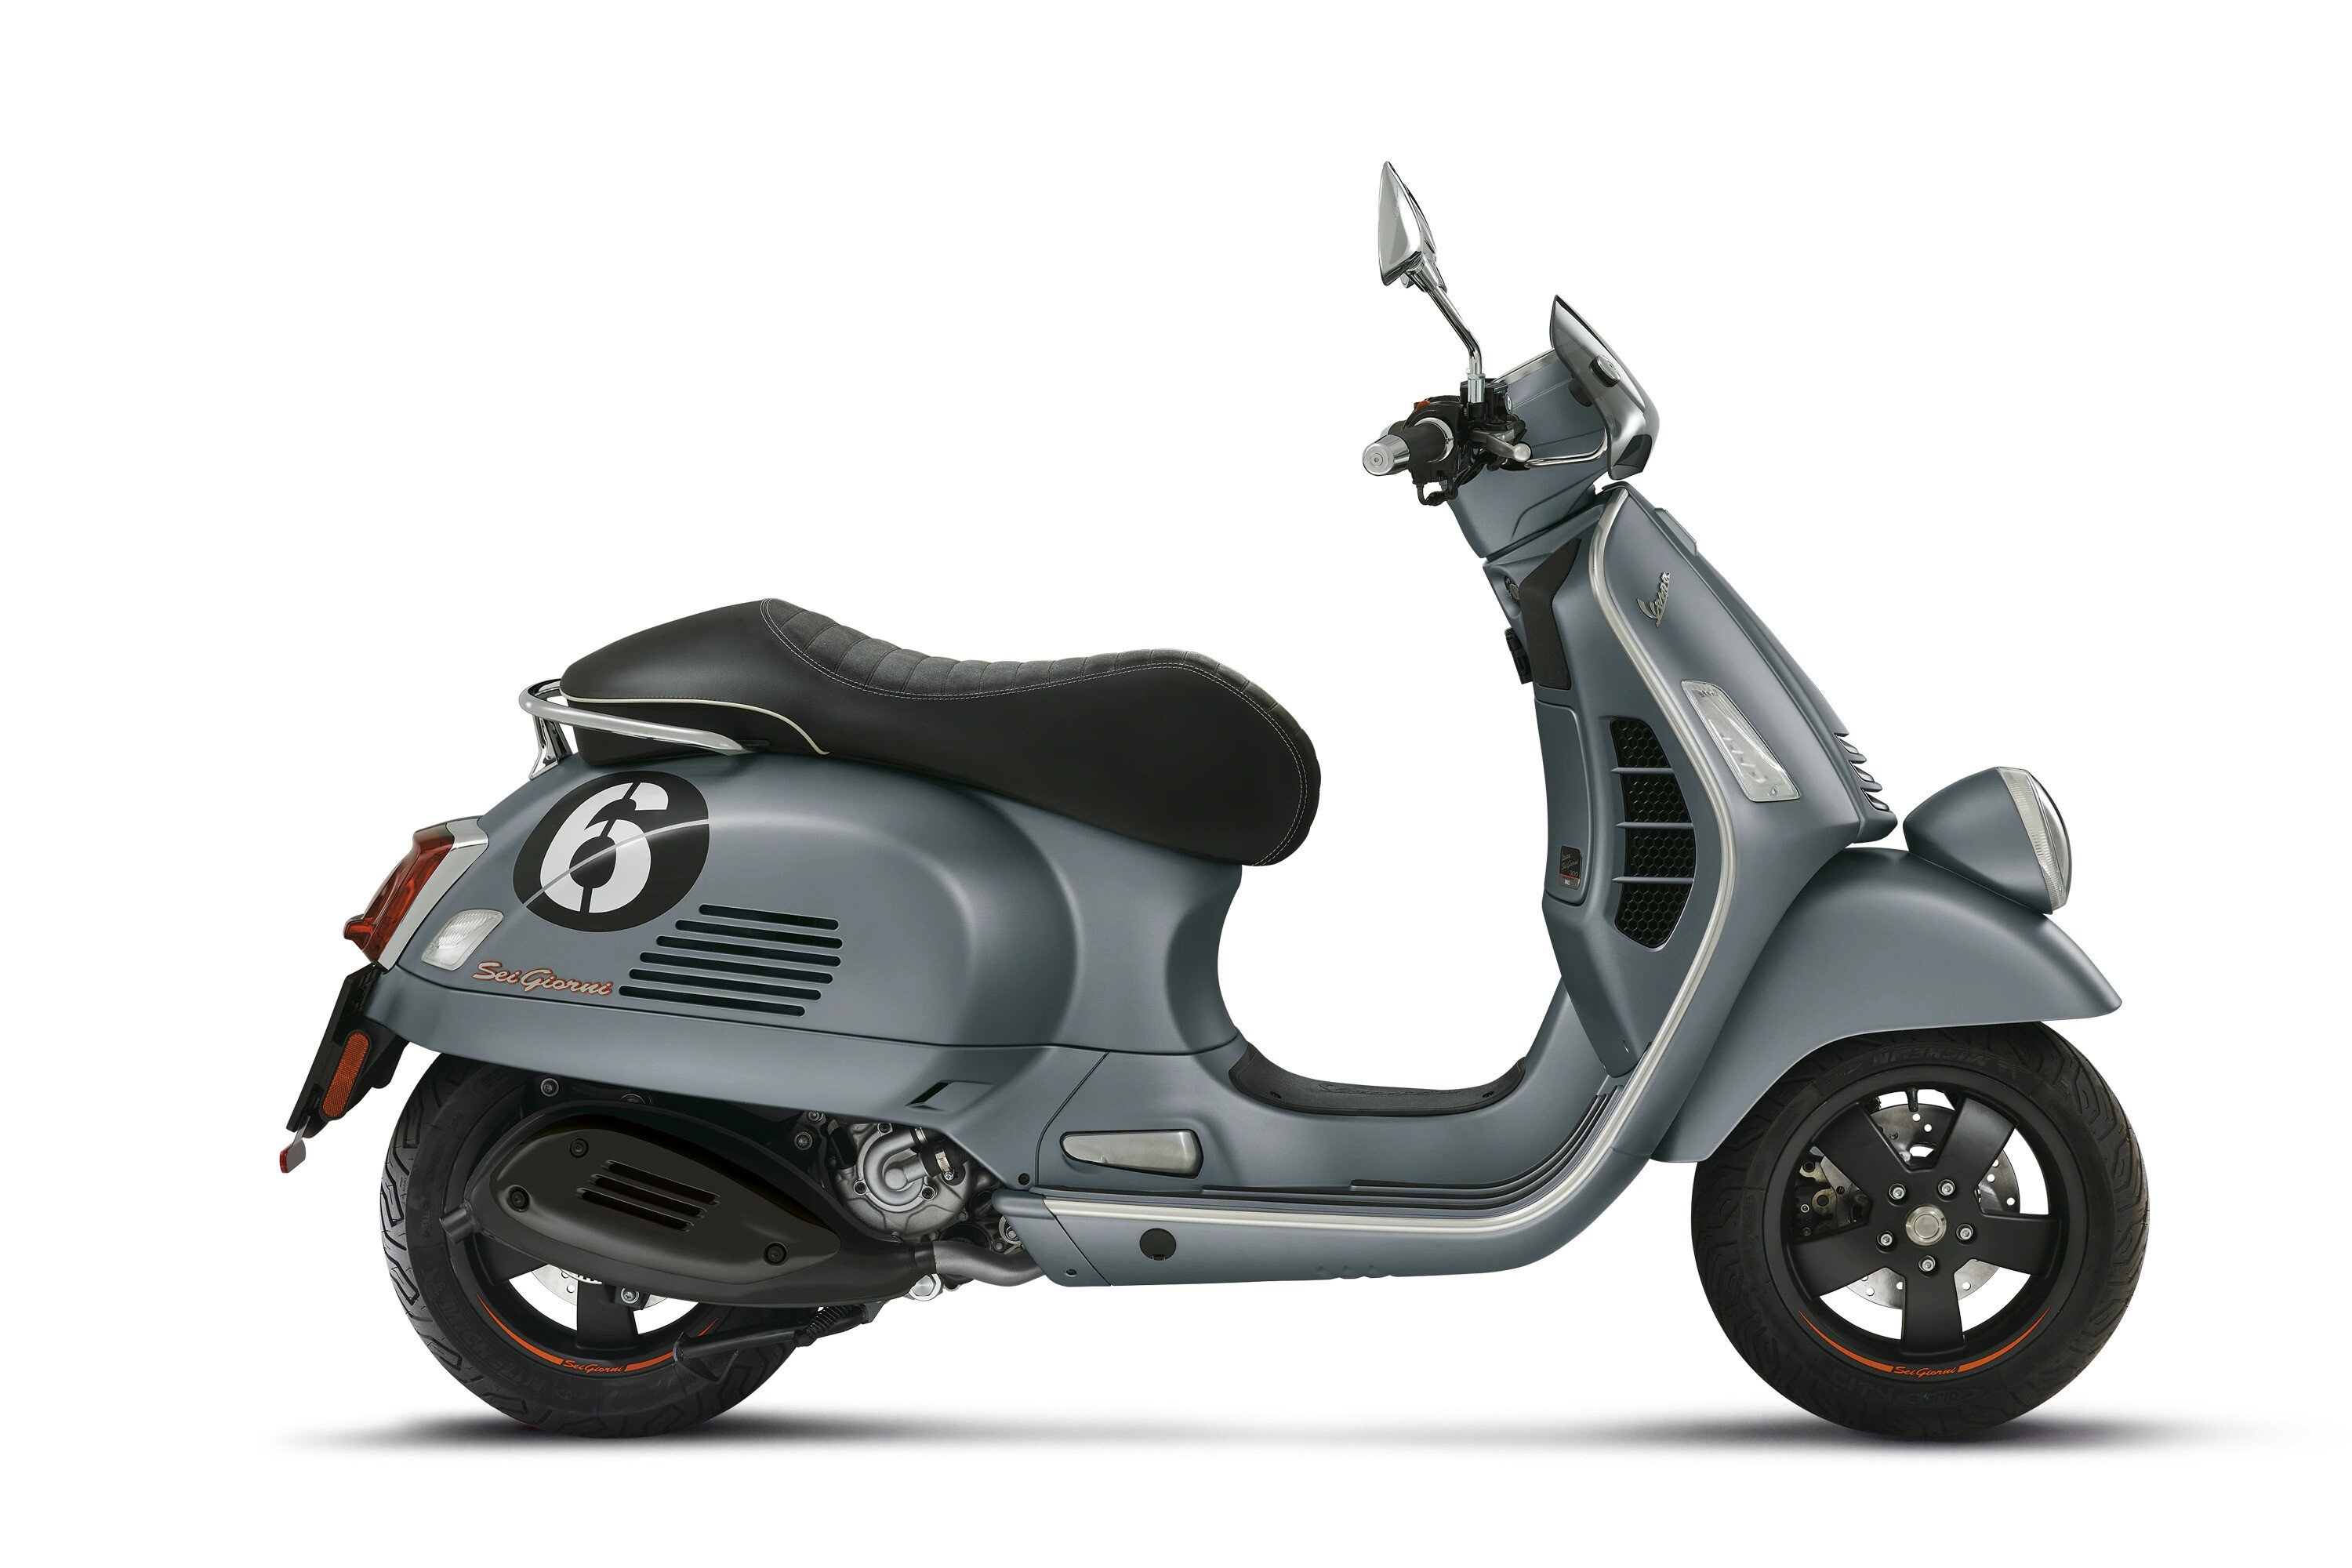 Vespa Scooter Buying Guide on Autotrader